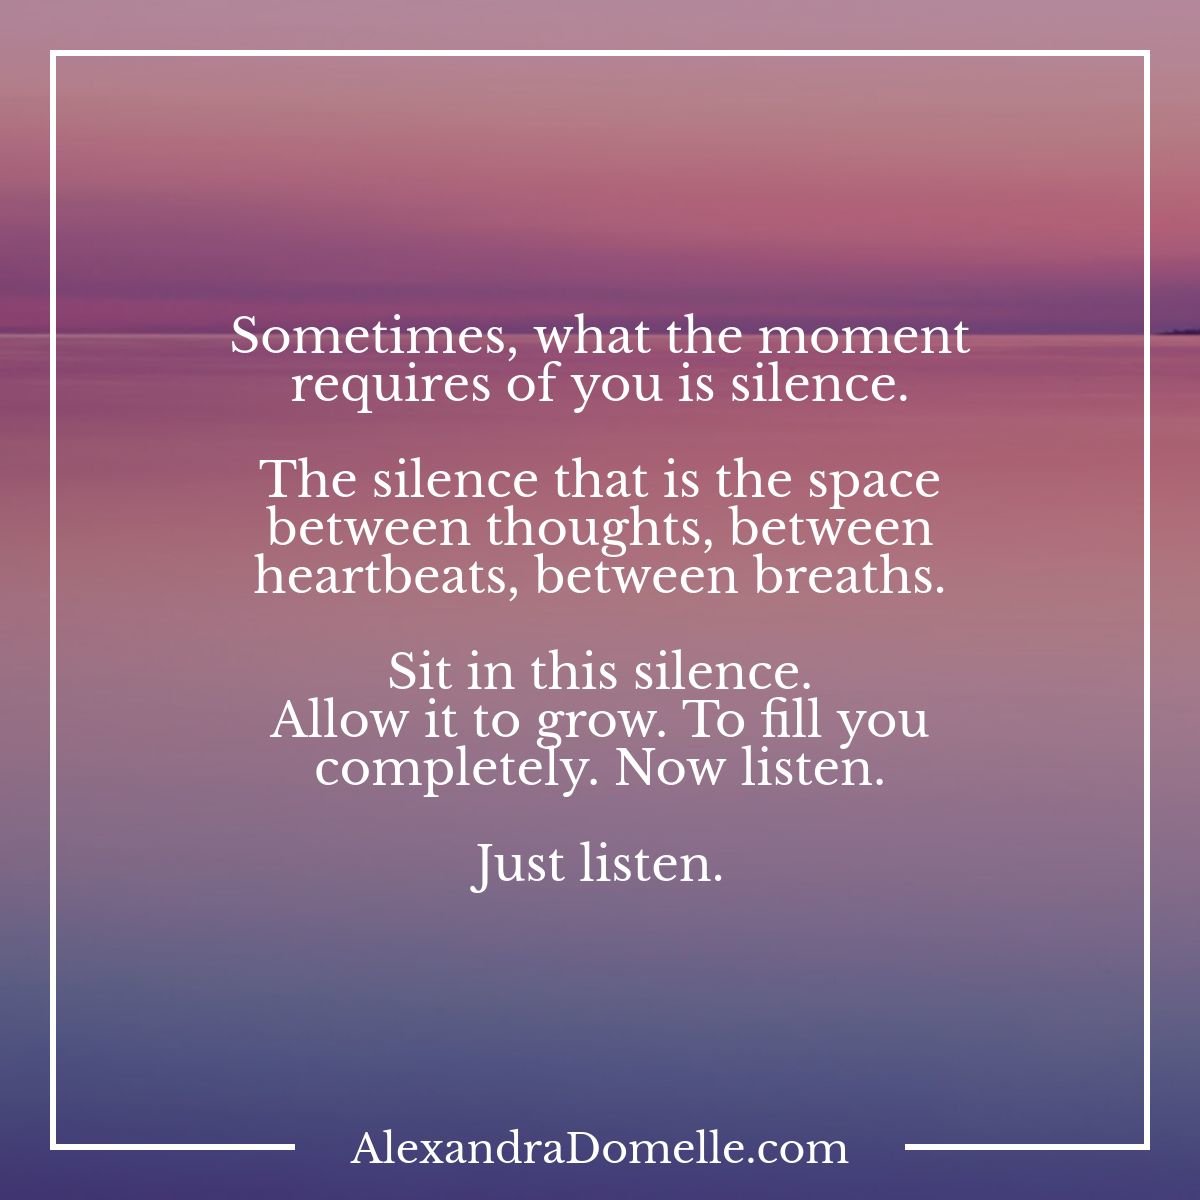 Sometimes, what the moment requires of you is silence. The silence that is the space between thoughts, between heartbeats, between breaths. Sit in this silence...Now listen. Just listen. - Alexandra Domelle #IQRTG #Meditation #Mindfulness #PresentMomentReminder #TheMindfulMoment